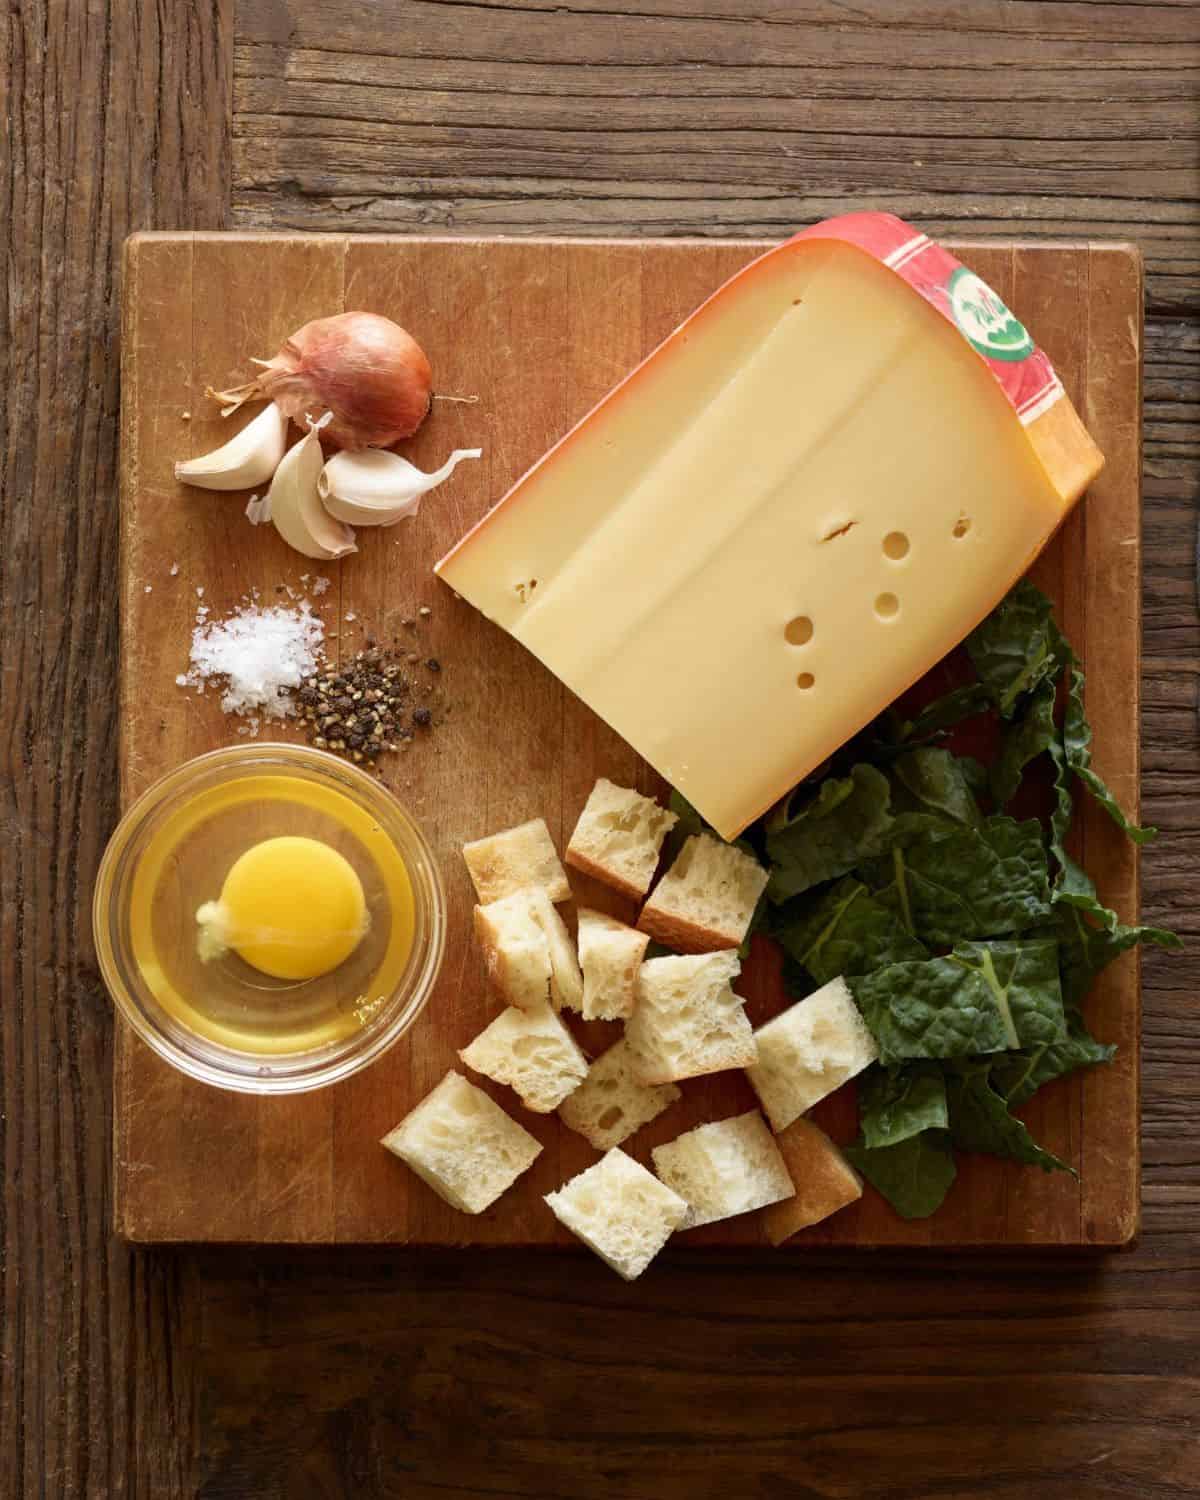 A wooden board with salt, pepper, garlic cloves, shallot, bread cubes, chopped kale, a small glass mixing bowl with a broken egg and a big block of Parrano cheese.